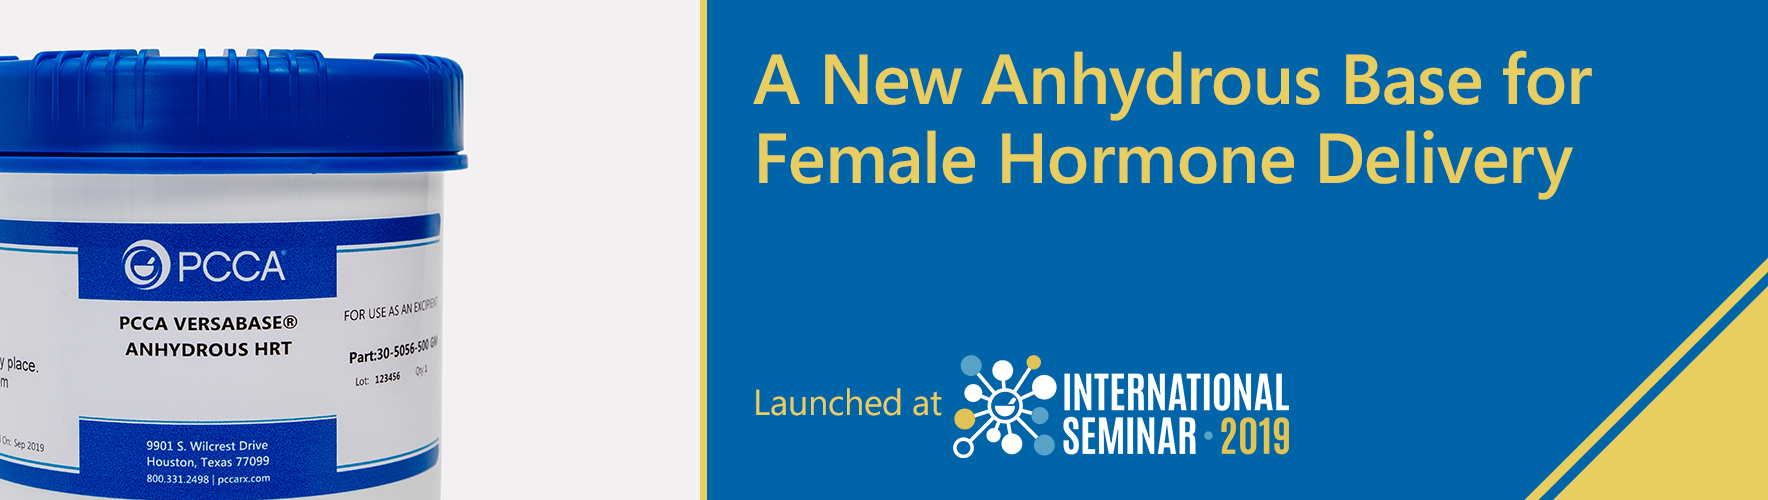 a_new_anhydrous_base_for_female_hormone_delivery.png.